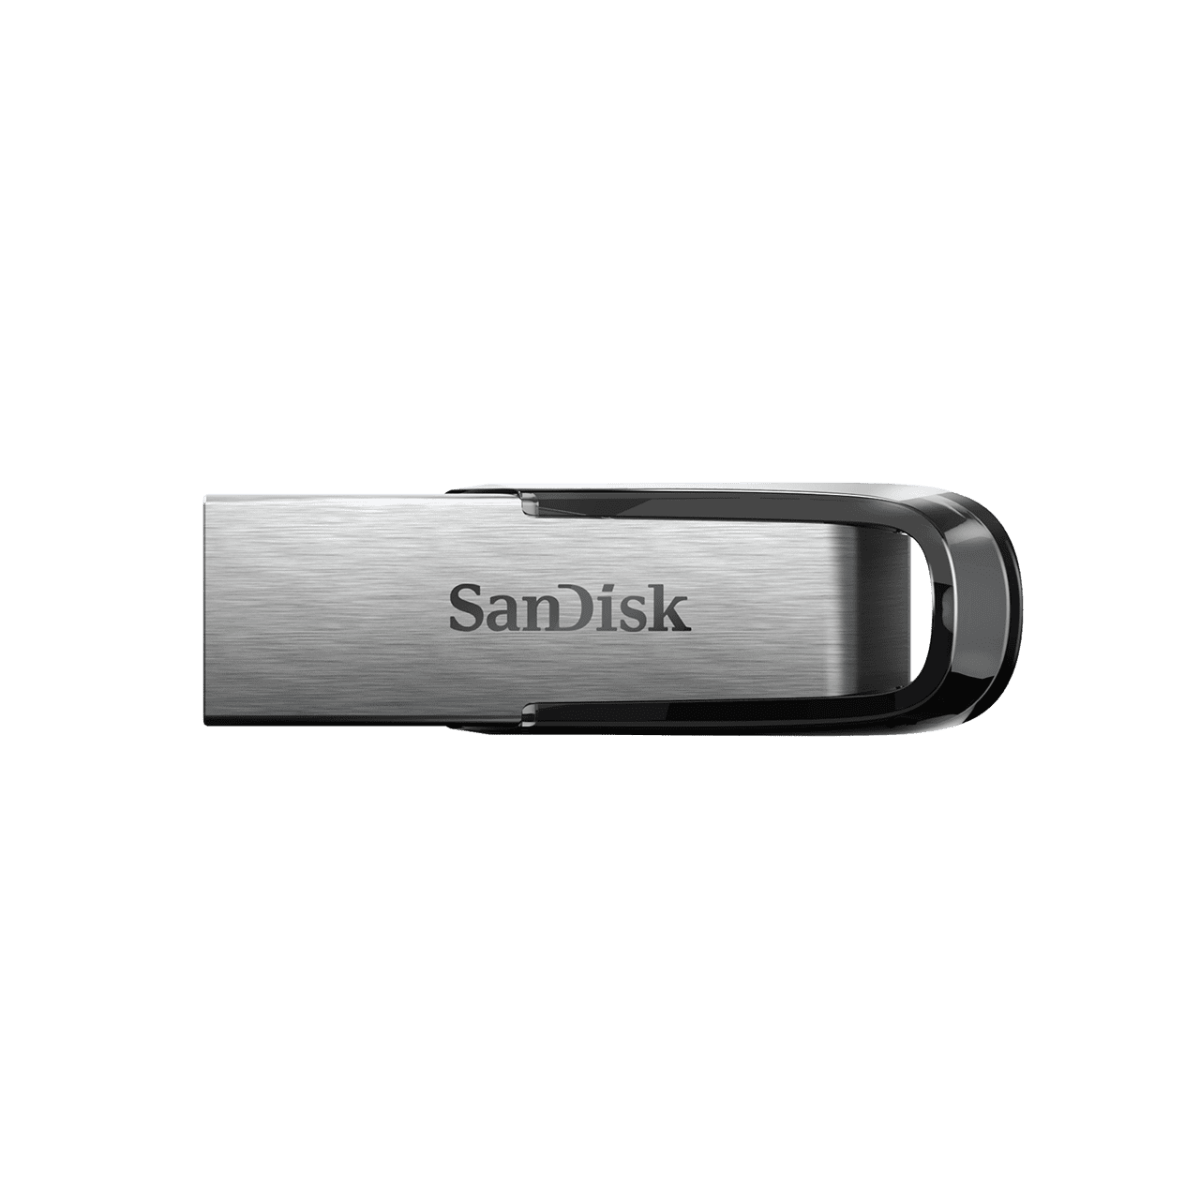 Ultra Flair Usb 3 0 Front.png.thumb .1280.1280 Sandisk &Lt;Div Class=&Quot;Inheritpara Mb-4&Quot;&Gt; The Sandisk Ultra Flair™ Usb 3.0 Flash Drive Moves Your Files Fast. Spend Less Time Waiting To Transfer Files And Enjoy High-Speed Usb 3.0 Performance Of Up To 150Mb/S&Lt;A Class=&Quot;Disclosure&Quot; Tabindex=&Quot;0&Quot; Href=&Quot;Https://Shop.westerndigital.com/Products/Usb-Flash-Drives/Sandisk-Ultra-Flair-Usb-3-0#Disclosures&Quot; Target=&Quot;_Self&Quot; Rel=&Quot;Noopener Noreferrer&Quot; Aria-Labelledby=&Quot;Disclosures&Quot;&Gt;&Lt;Sup&Gt;**&Lt;/Sup&Gt;&Lt;/A&Gt;. Its Durable And Sleek Metal Casing Is Tough Enough To Handle Knocks With Style. And, With Password Protection, You Can Rest Assured That Your Private Files Stay Private&Lt;A Class=&Quot;Disclosure&Quot; Tabindex=&Quot;0&Quot; Href=&Quot;Https://Shop.westerndigital.com/Products/Usb-Flash-Drives/Sandisk-Ultra-Flair-Usb-3-0#Disclosures&Quot; Target=&Quot;_Self&Quot; Rel=&Quot;Noopener Noreferrer&Quot; Aria-Labelledby=&Quot;Disclosures&Quot;&Gt;&Lt;Sup&Gt;1&Lt;/Sup&Gt;&Lt;/A&Gt;. Store Your Files In Style With The Sandisk Ultra Flair Usb 3.0 Flash Drive. &Lt;Strong&Gt;Warranty&Lt;/Strong&Gt; The Sandisk Ultra Flair Usb 3.0 Flash Drive Is Backed By A Five-Year Manufacturer Warranty&Lt;A Class=&Quot;Disclosure&Quot; Tabindex=&Quot;0&Quot; Href=&Quot;Https://Shop.westerndigital.com/Products/Usb-Flash-Drives/Sandisk-Ultra-Flair-Usb-3-0#Disclosures&Quot; Target=&Quot;_Self&Quot; Rel=&Quot;Noopener Noreferrer&Quot; Aria-Labelledby=&Quot;Disclosures&Quot;&Gt;&Lt;Sup&Gt;2&Lt;/Sup&Gt;&Lt;/A&Gt; &Lt;/Div&Gt; Sandisk Ultra Flair Usb 3.0 Flash Drive (64Gb)